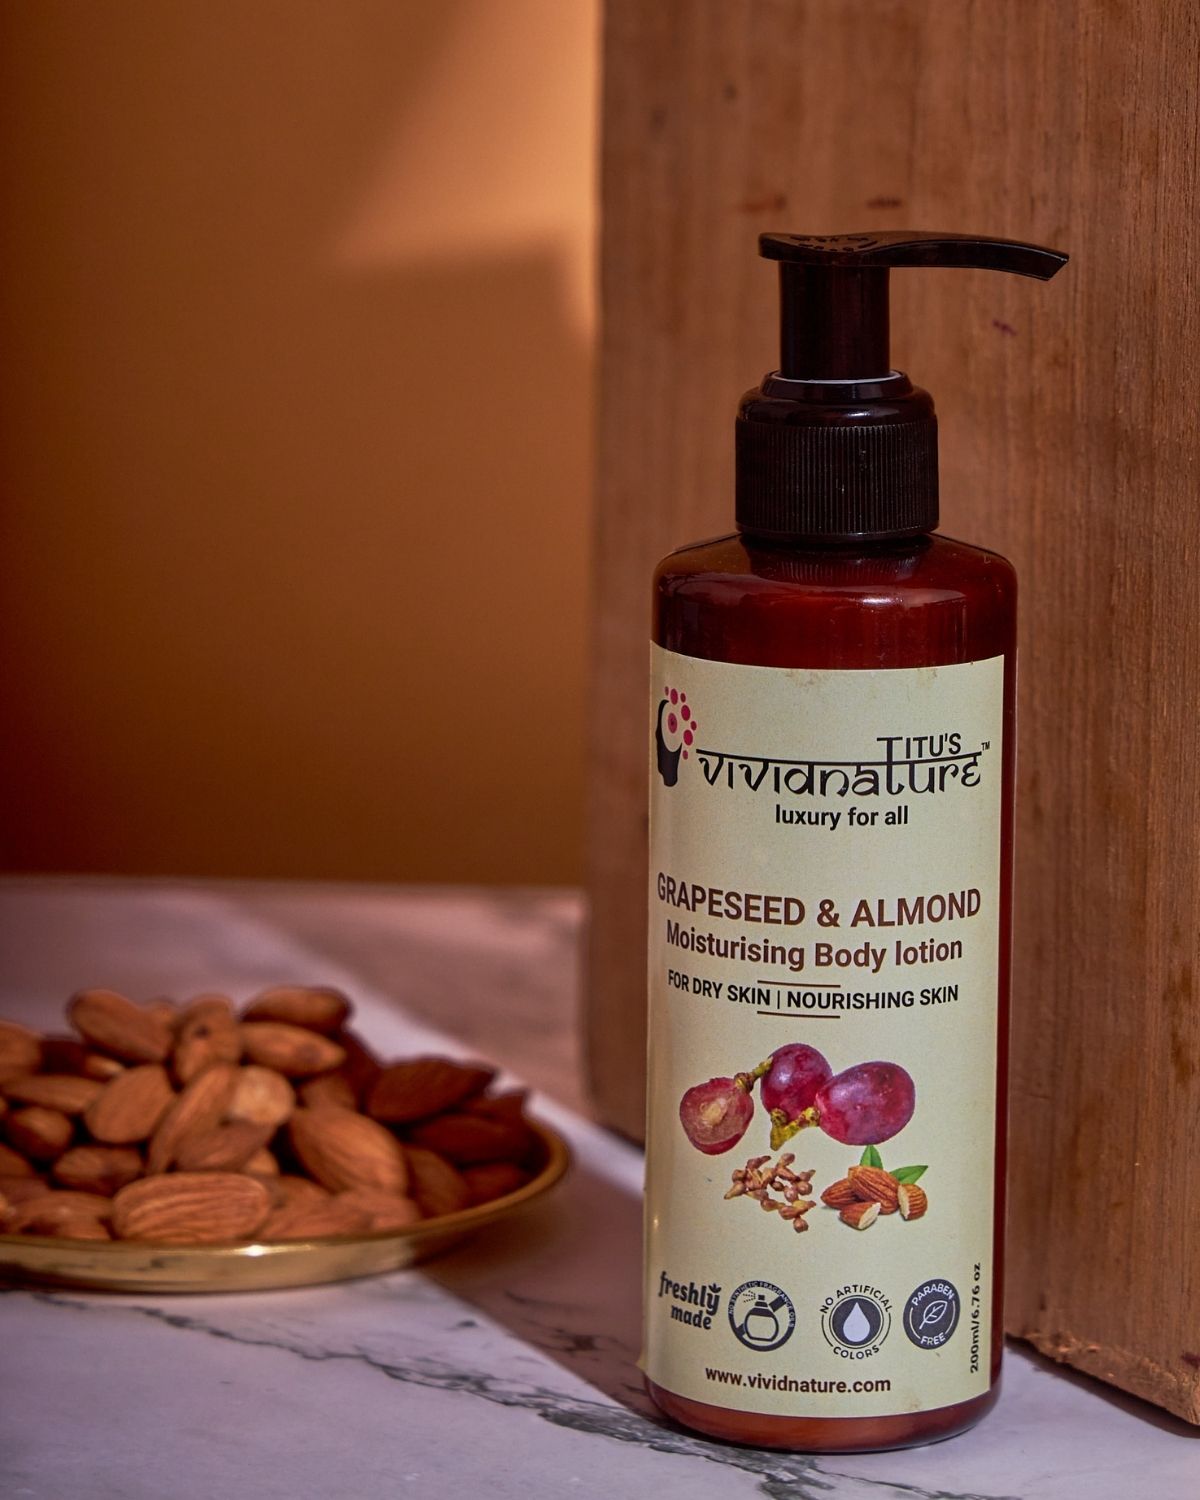 Grapeseed & Almond Body Lotion